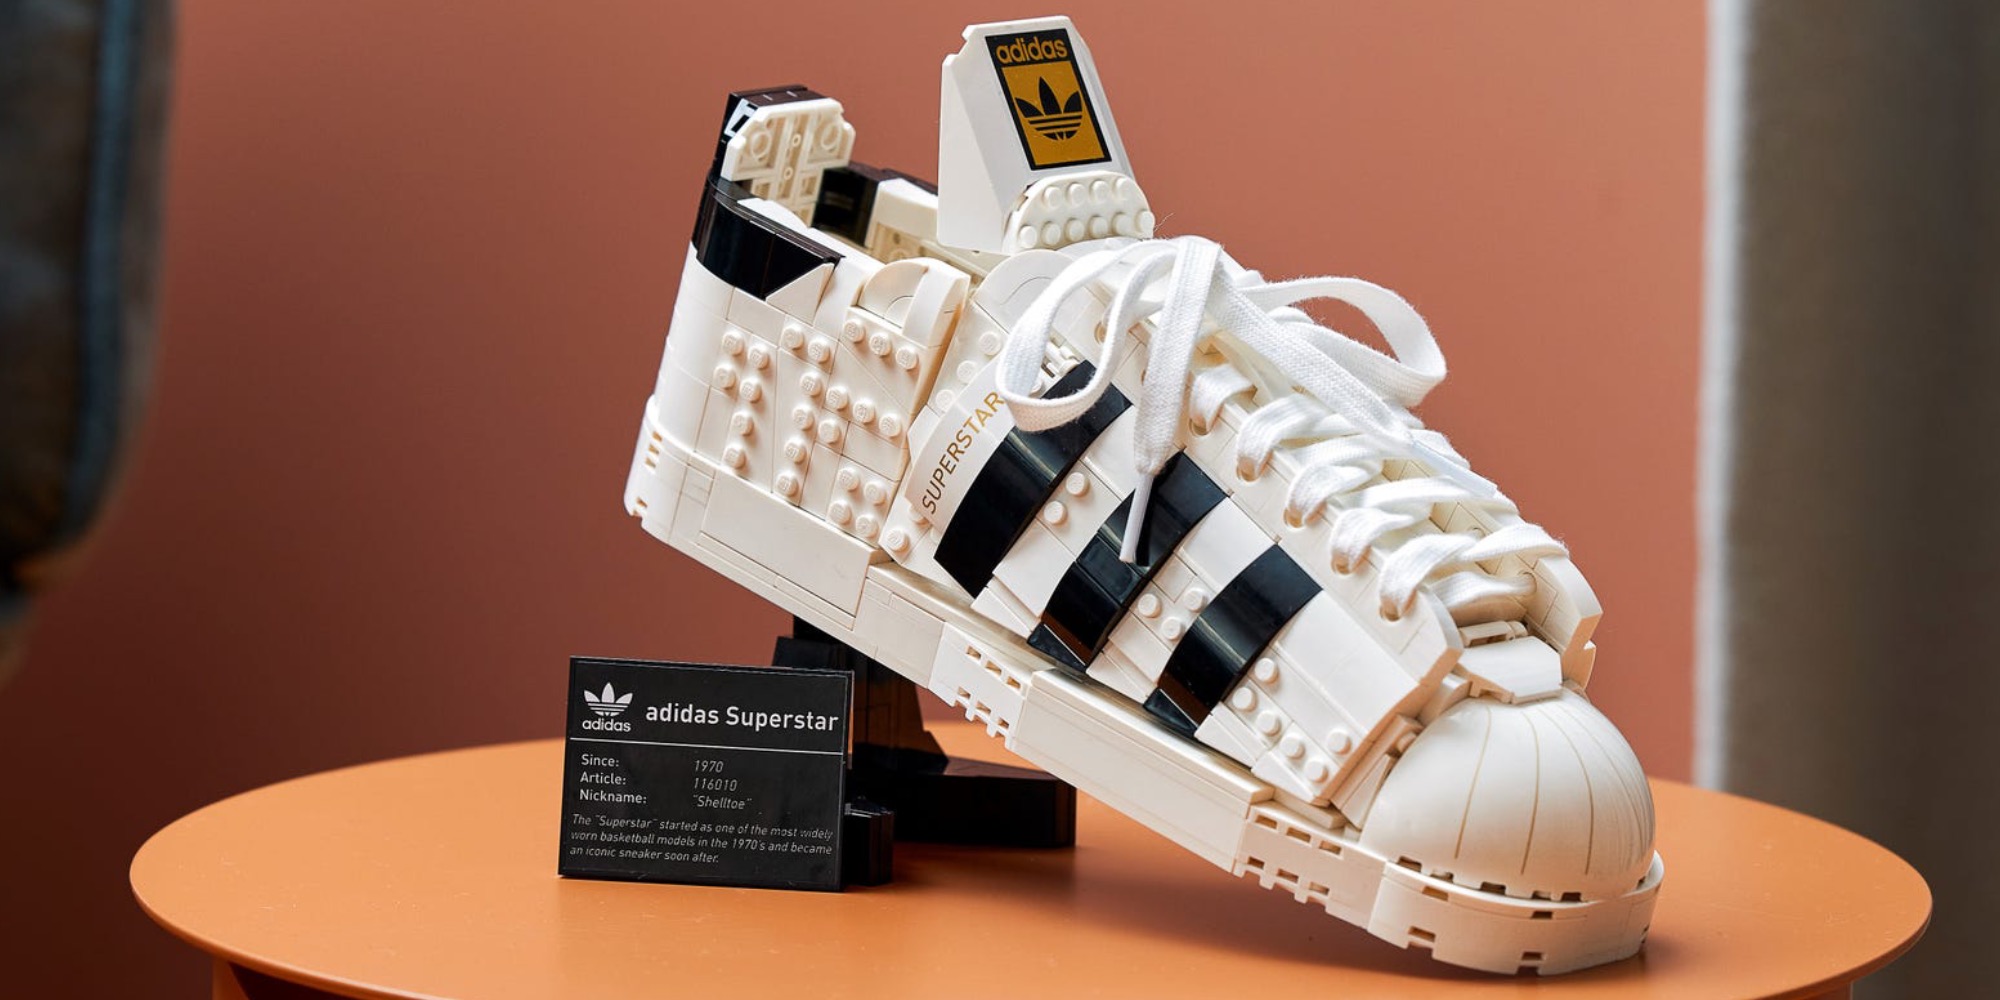 LEGO's adidas Superstar sneaker sees rare discount to low of $64 (Save 20%), more